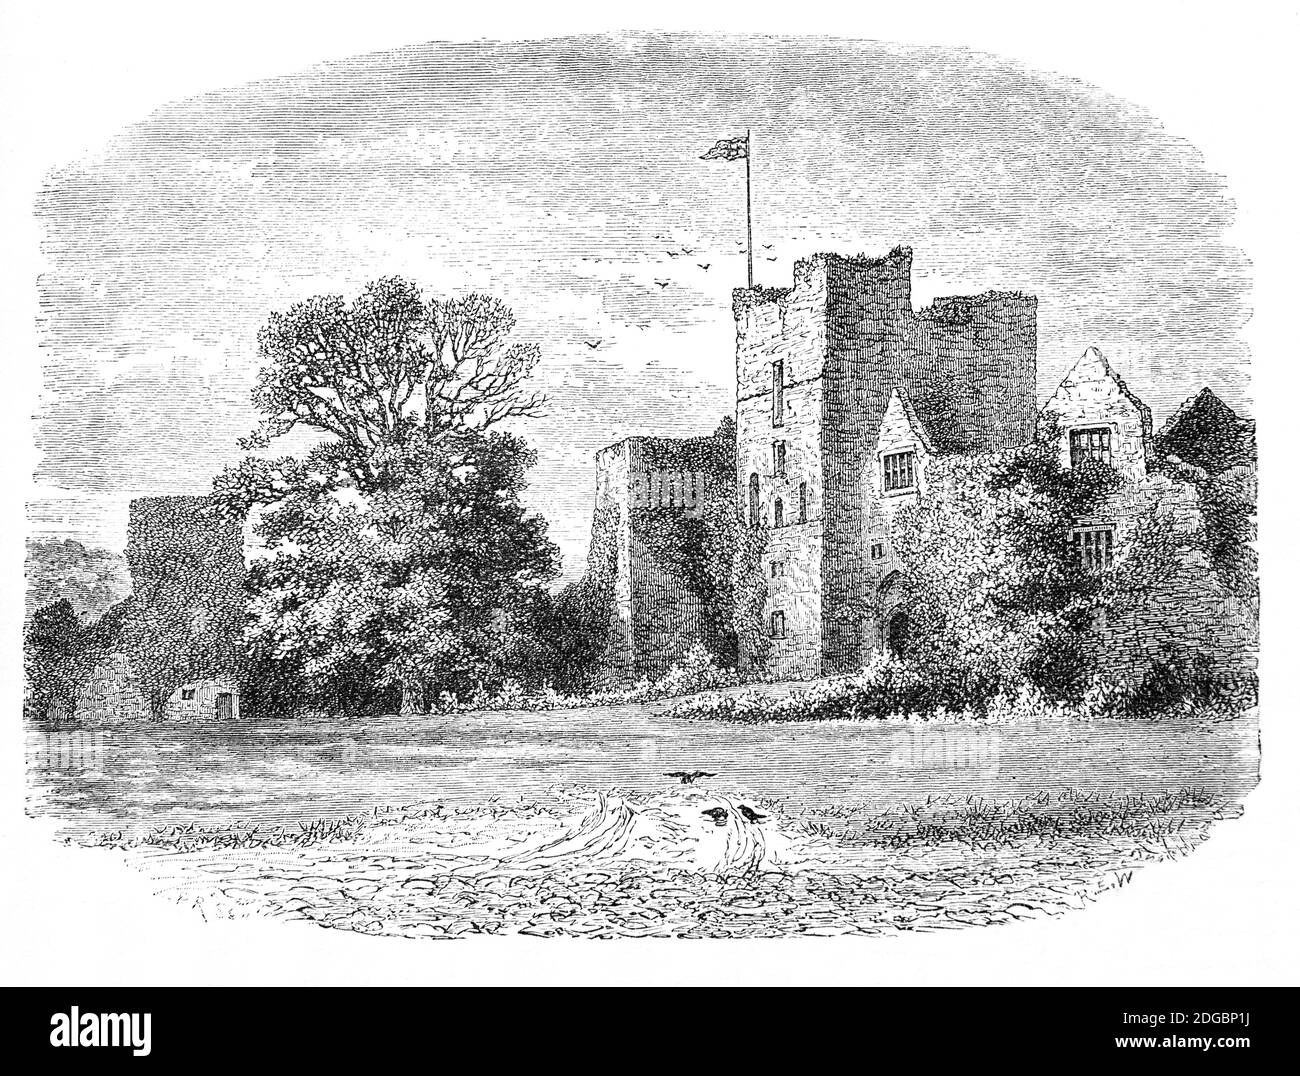 A late 19th Century view of Ludlow Castle, a ruined medieval castle in Ludlow, Shropshire and one of the first stone castles to be built in England. It was probably founded in the 11th Century by Walter de Lacy after the Norman conquest. During the English Civil War, it was besieged, taken by a Parliamentarian army in 1646 where a garrison was retained for much of the interregnum. After the Restoration of 1660, it fell into neglect until a mansion was constructed in the outer bailey. Apart from some landscaping the remainder of the castle has been left largely untouched. Stock Photo